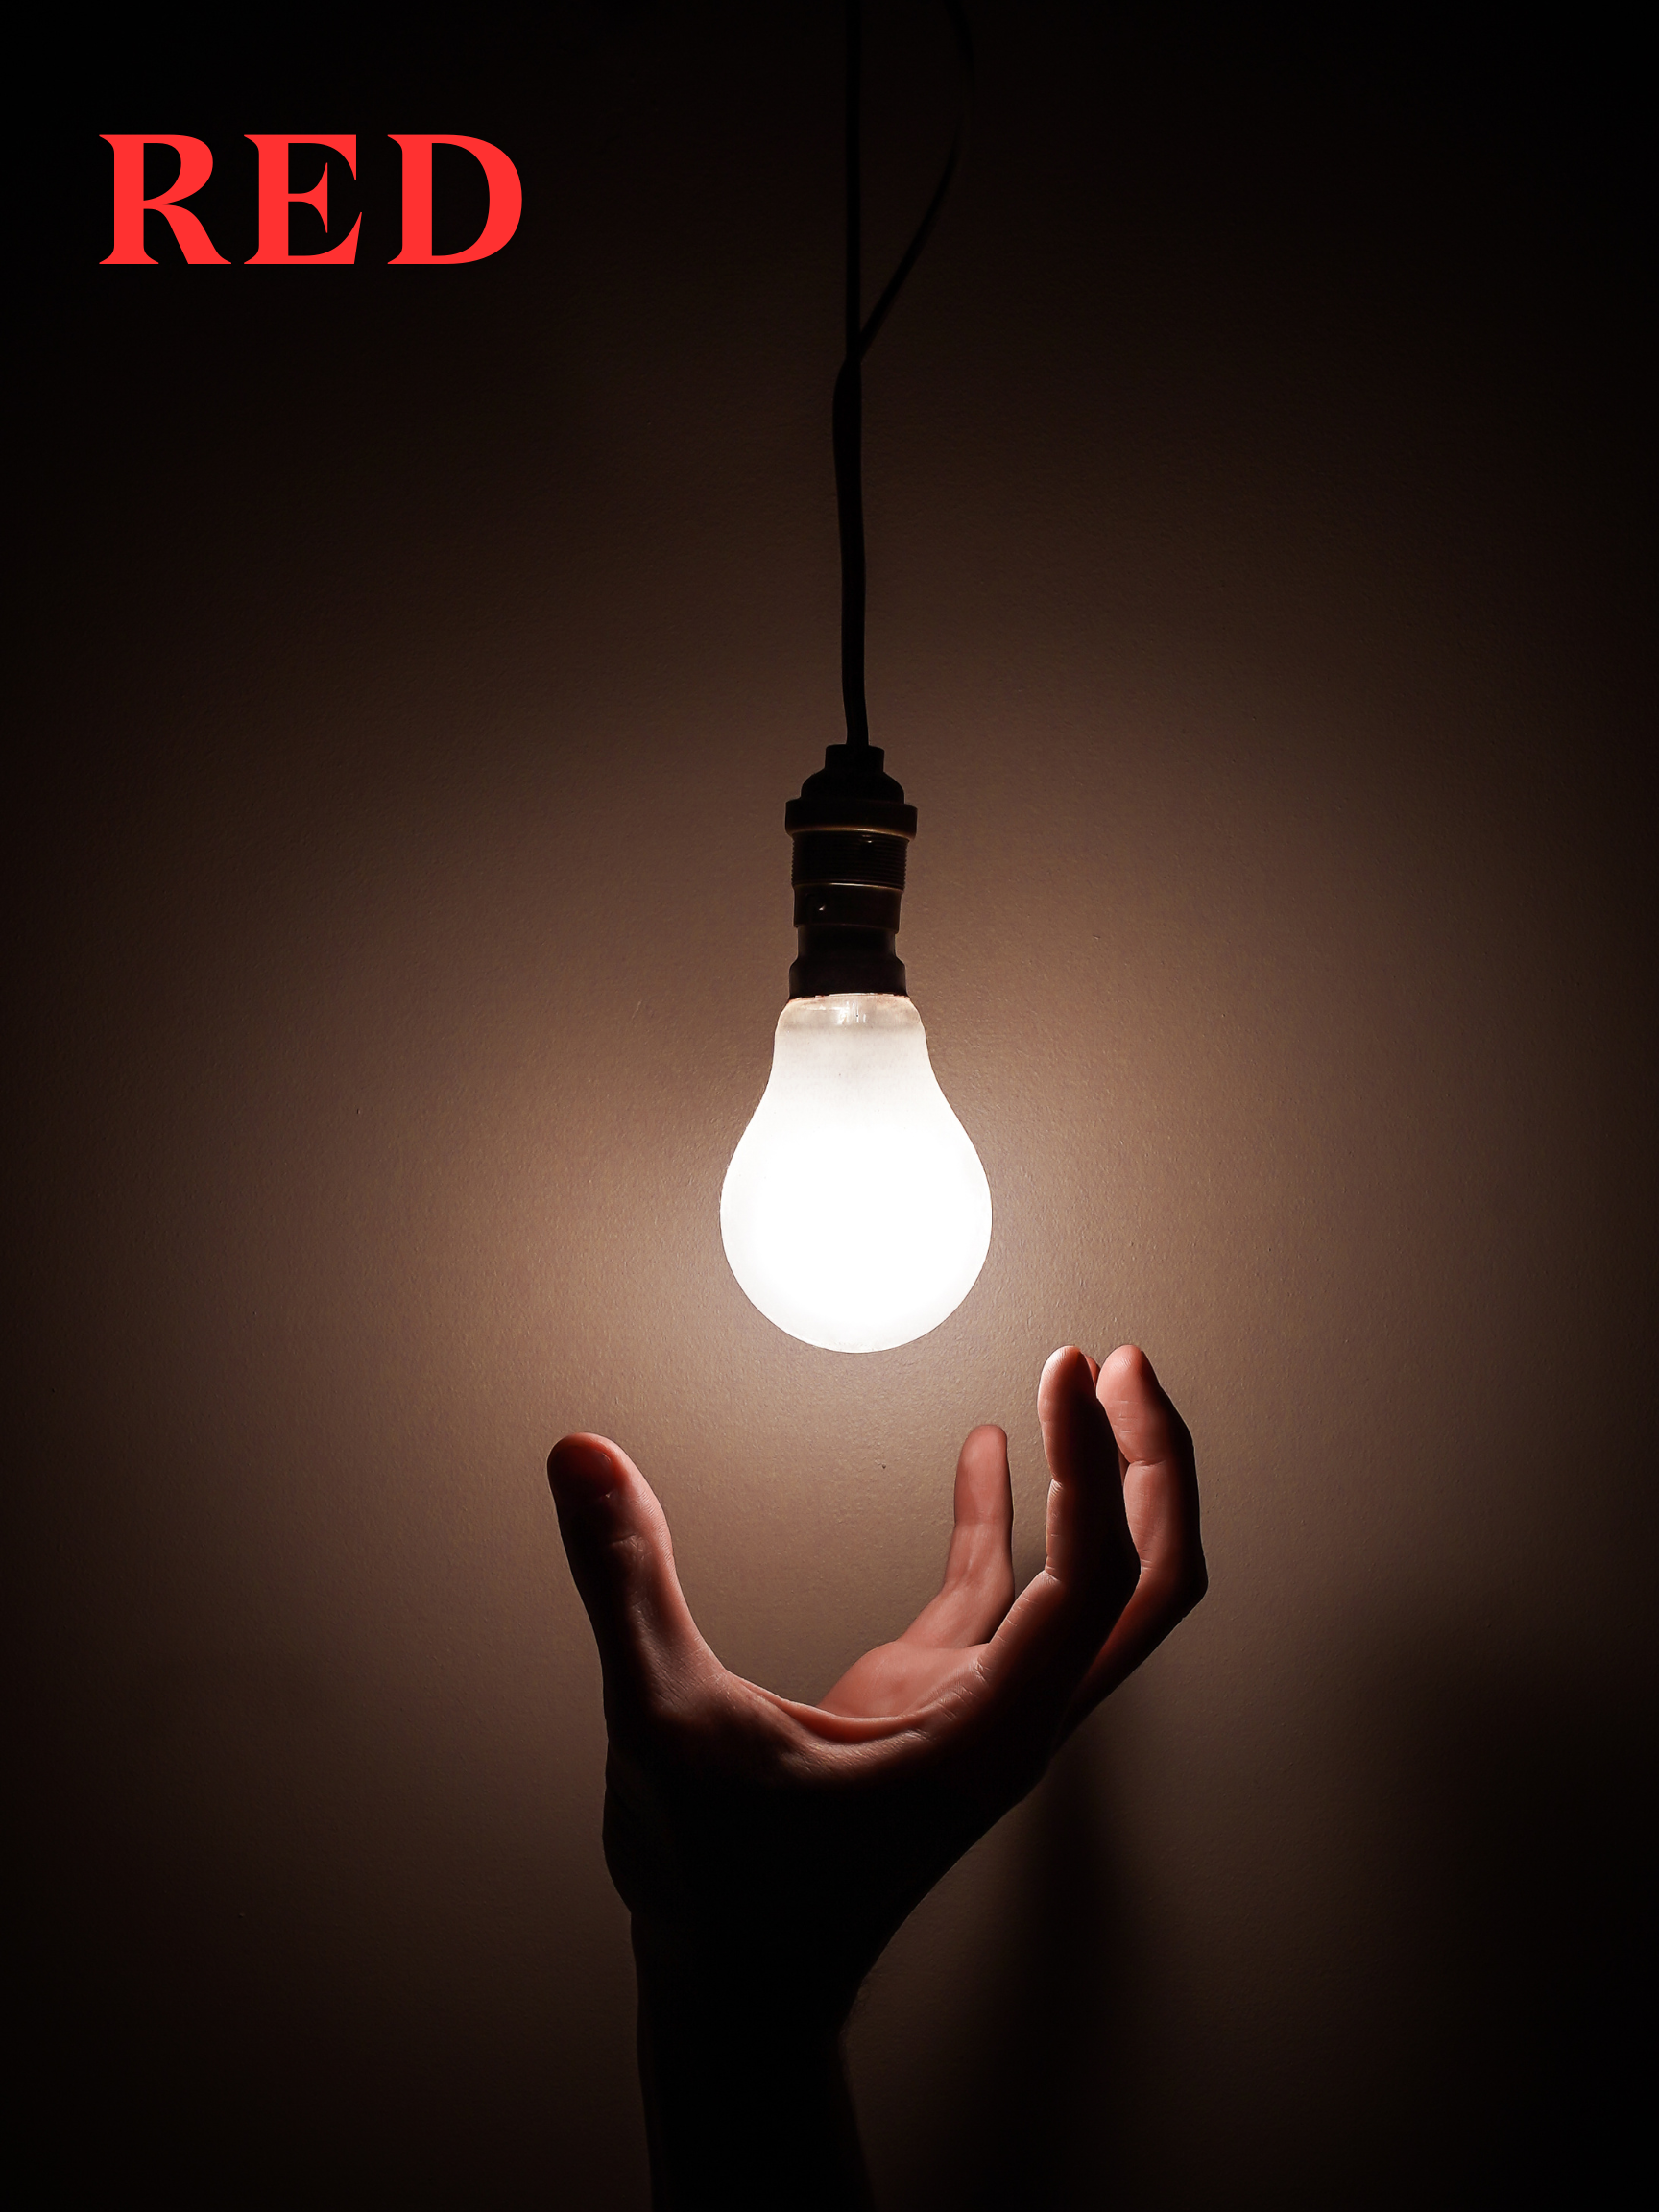 "Red" poster hand reaching for lit lightbulb hanging from ceiling